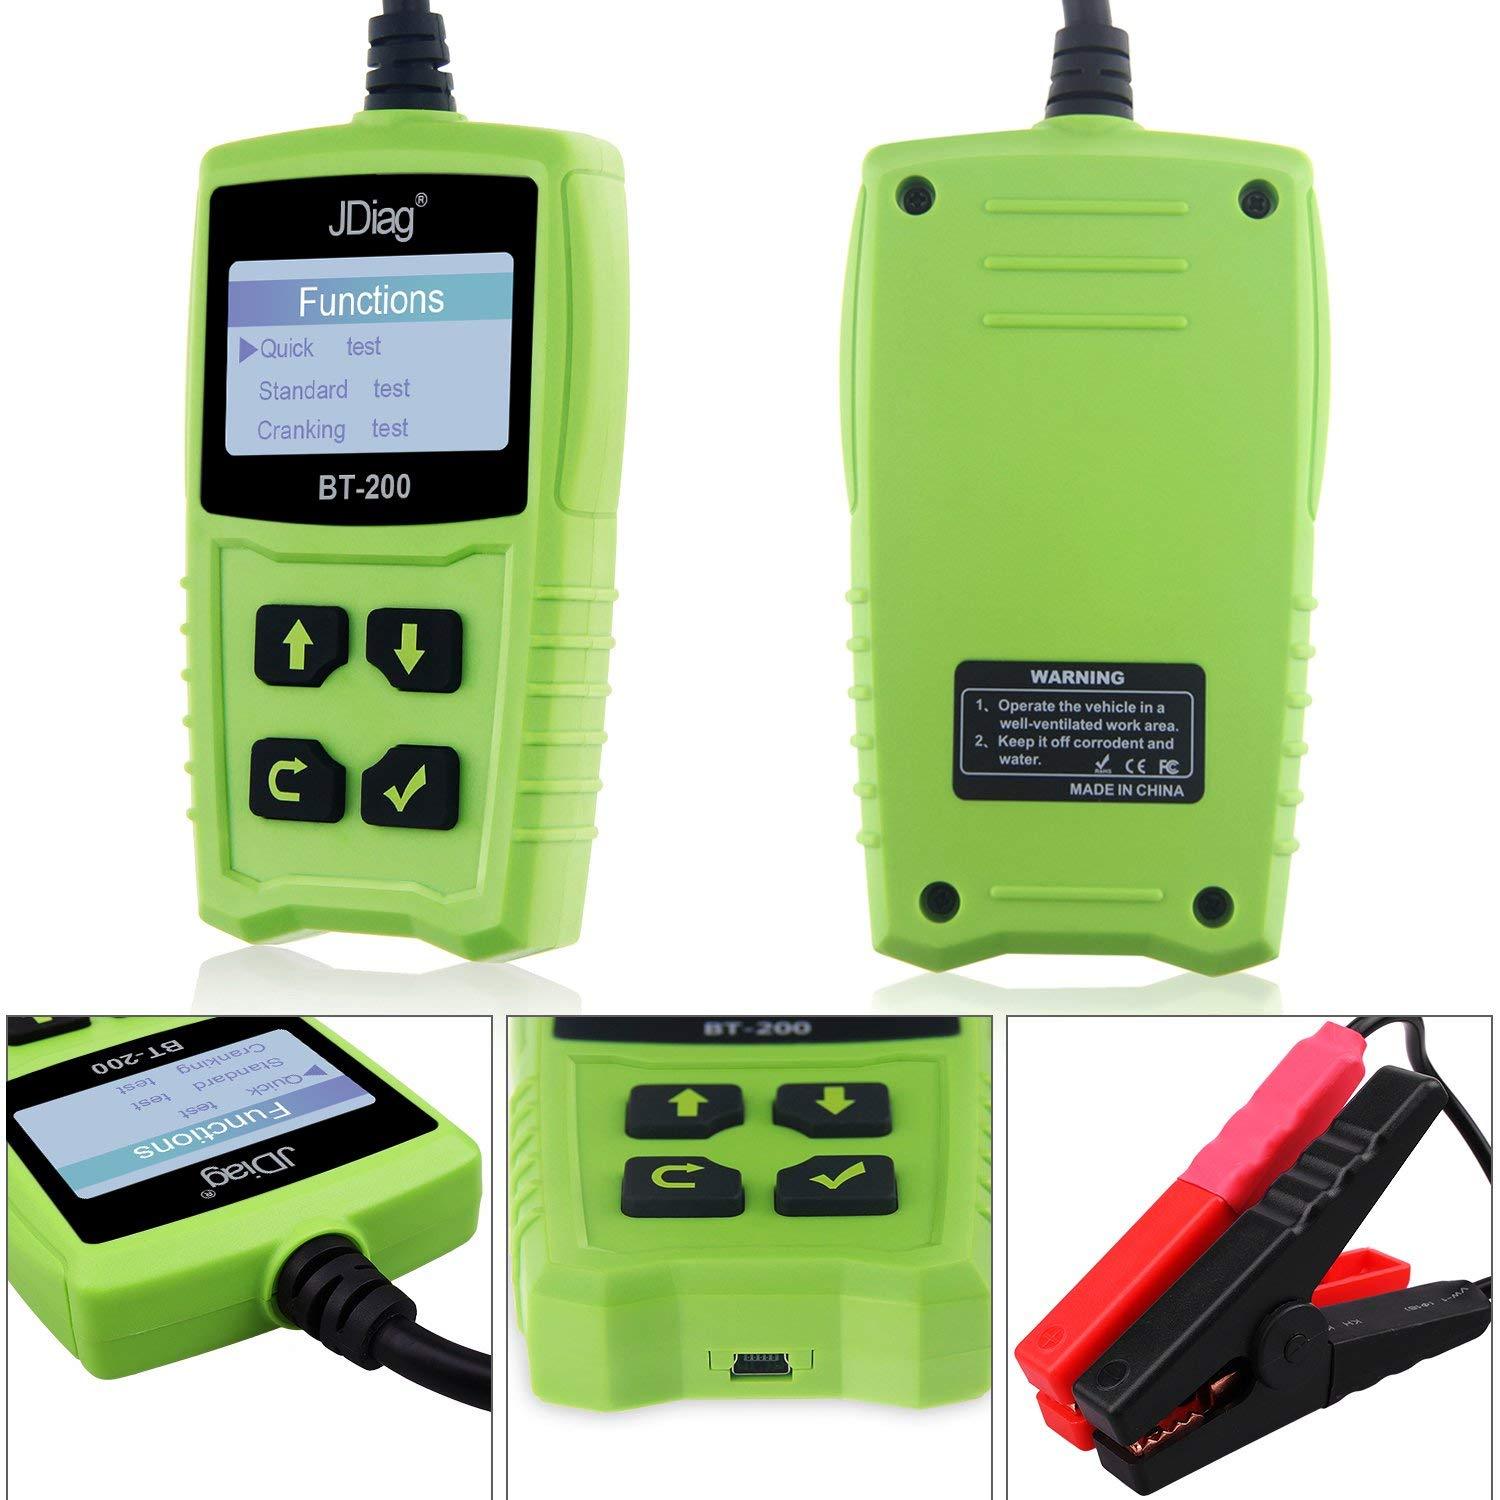 100AH BT200 Automotive Load Battery Tester Digital Analyzer Bad Cell Test Tool for Car/Boat/Motorcycle and More